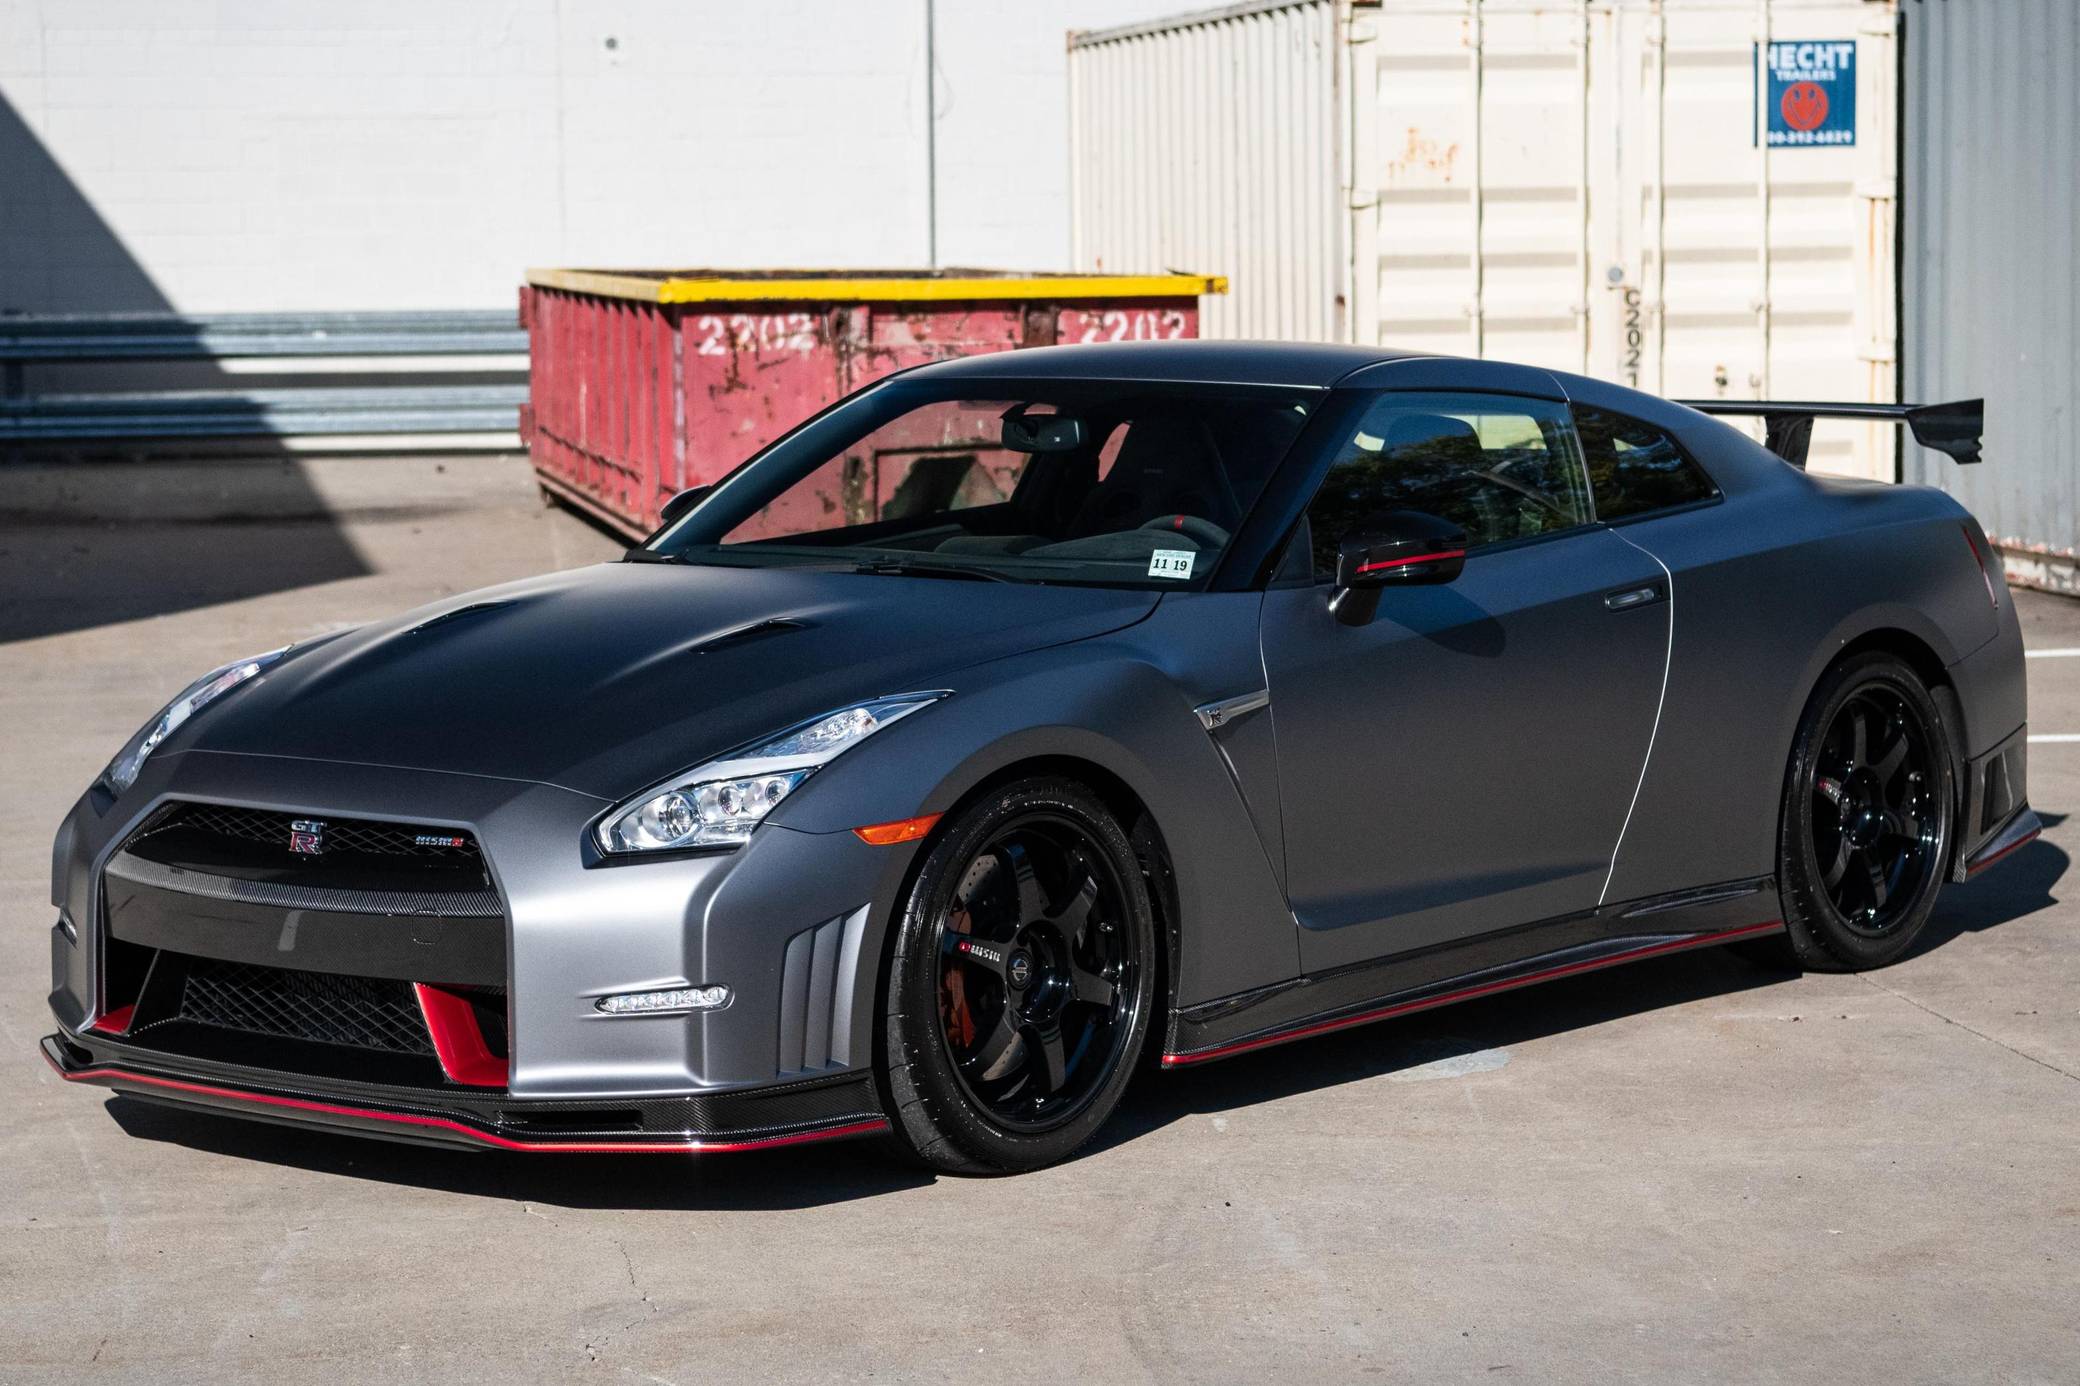 The Evolution of a Supercar: All About the GT-R's History